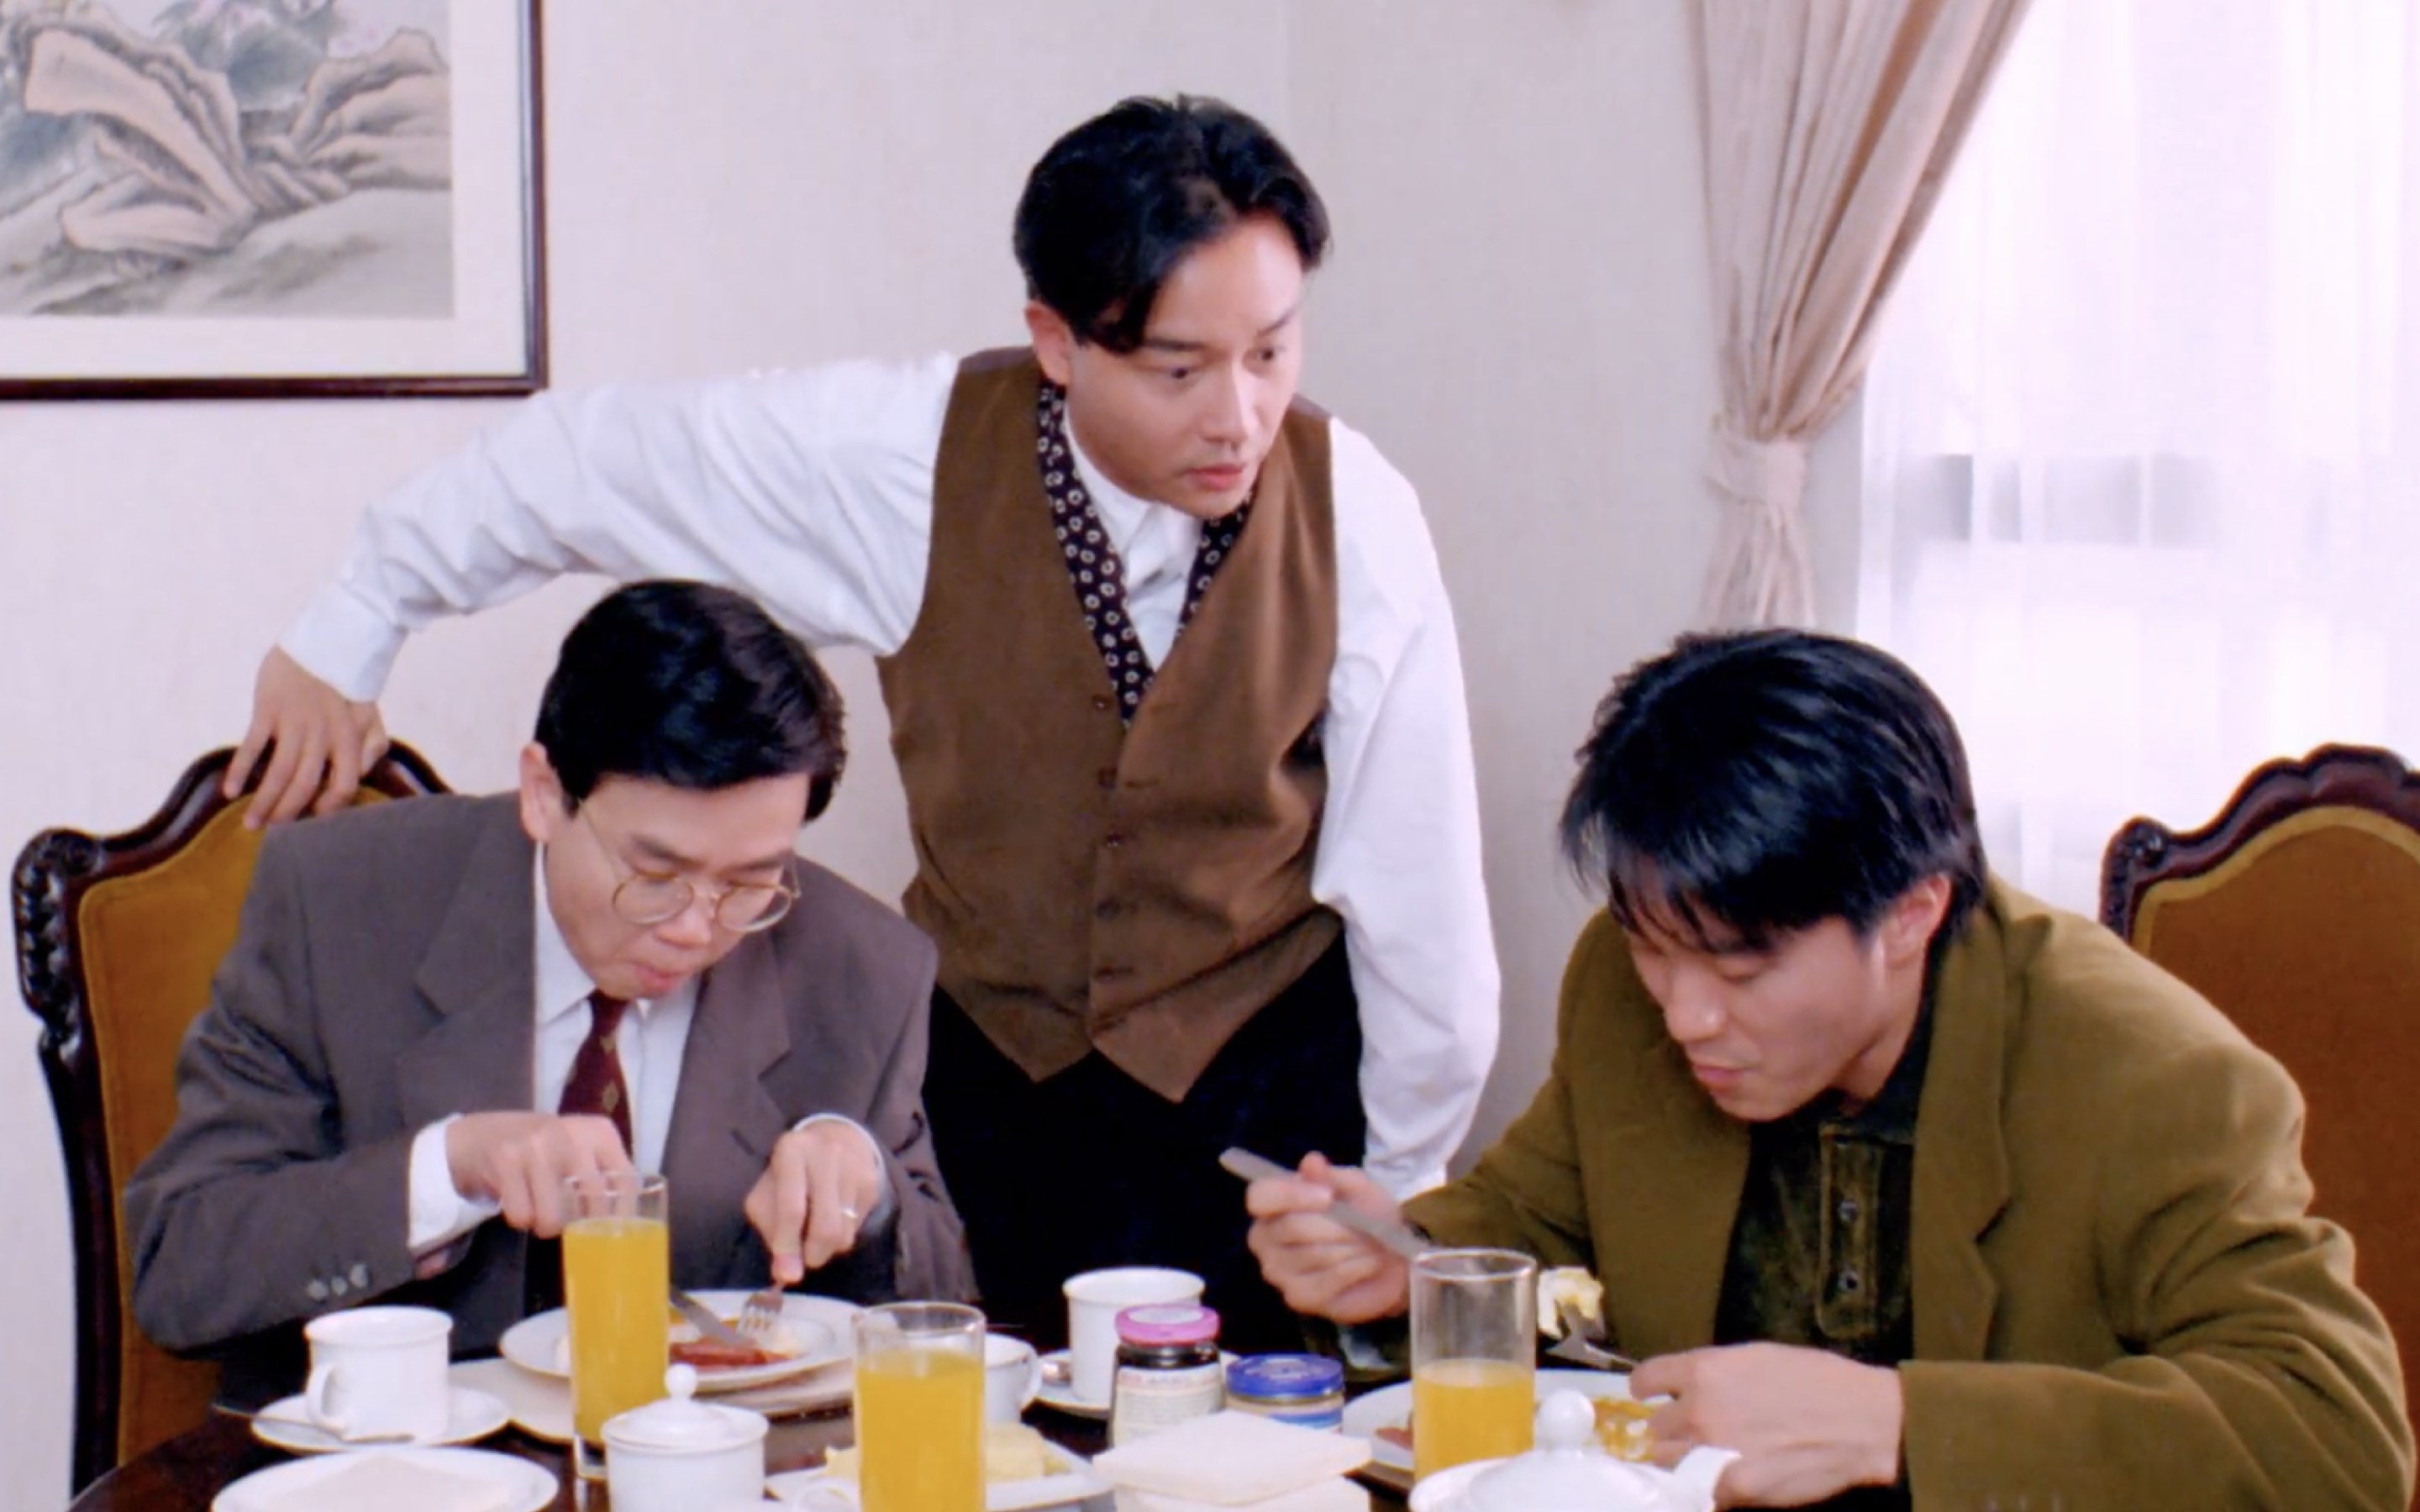 Stephen Chow, Leslie Cheung and Raymond Wong star as three hapless brothers in Chinese New Year comedy All’s Well Ends Well. Screengrab via YouTube.